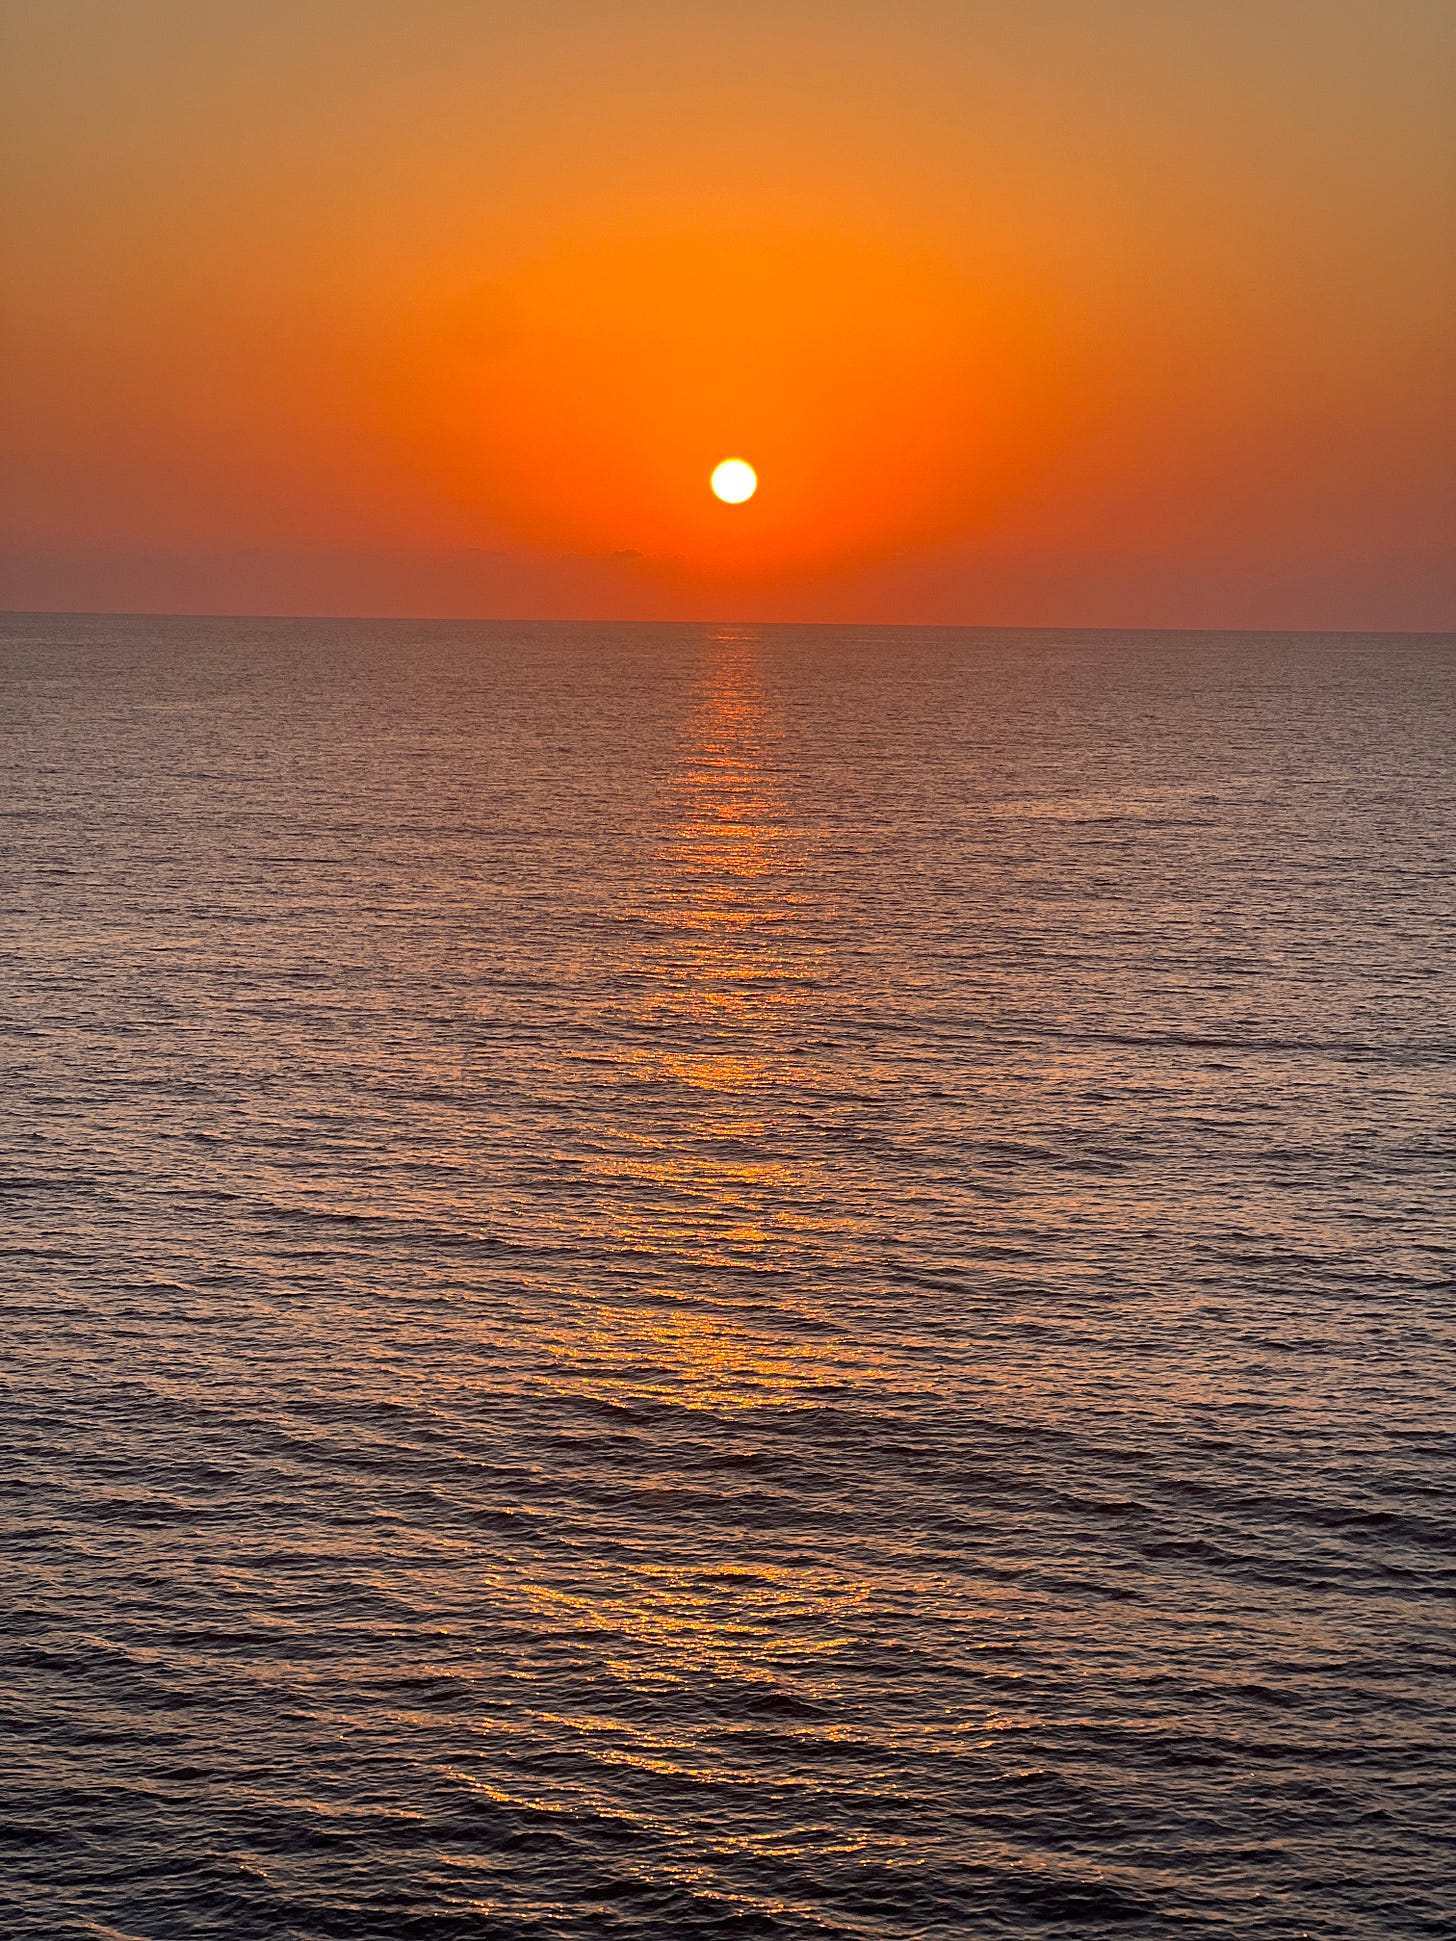 A sunset on the sea, with a beam of bright orange stretching across the ocean